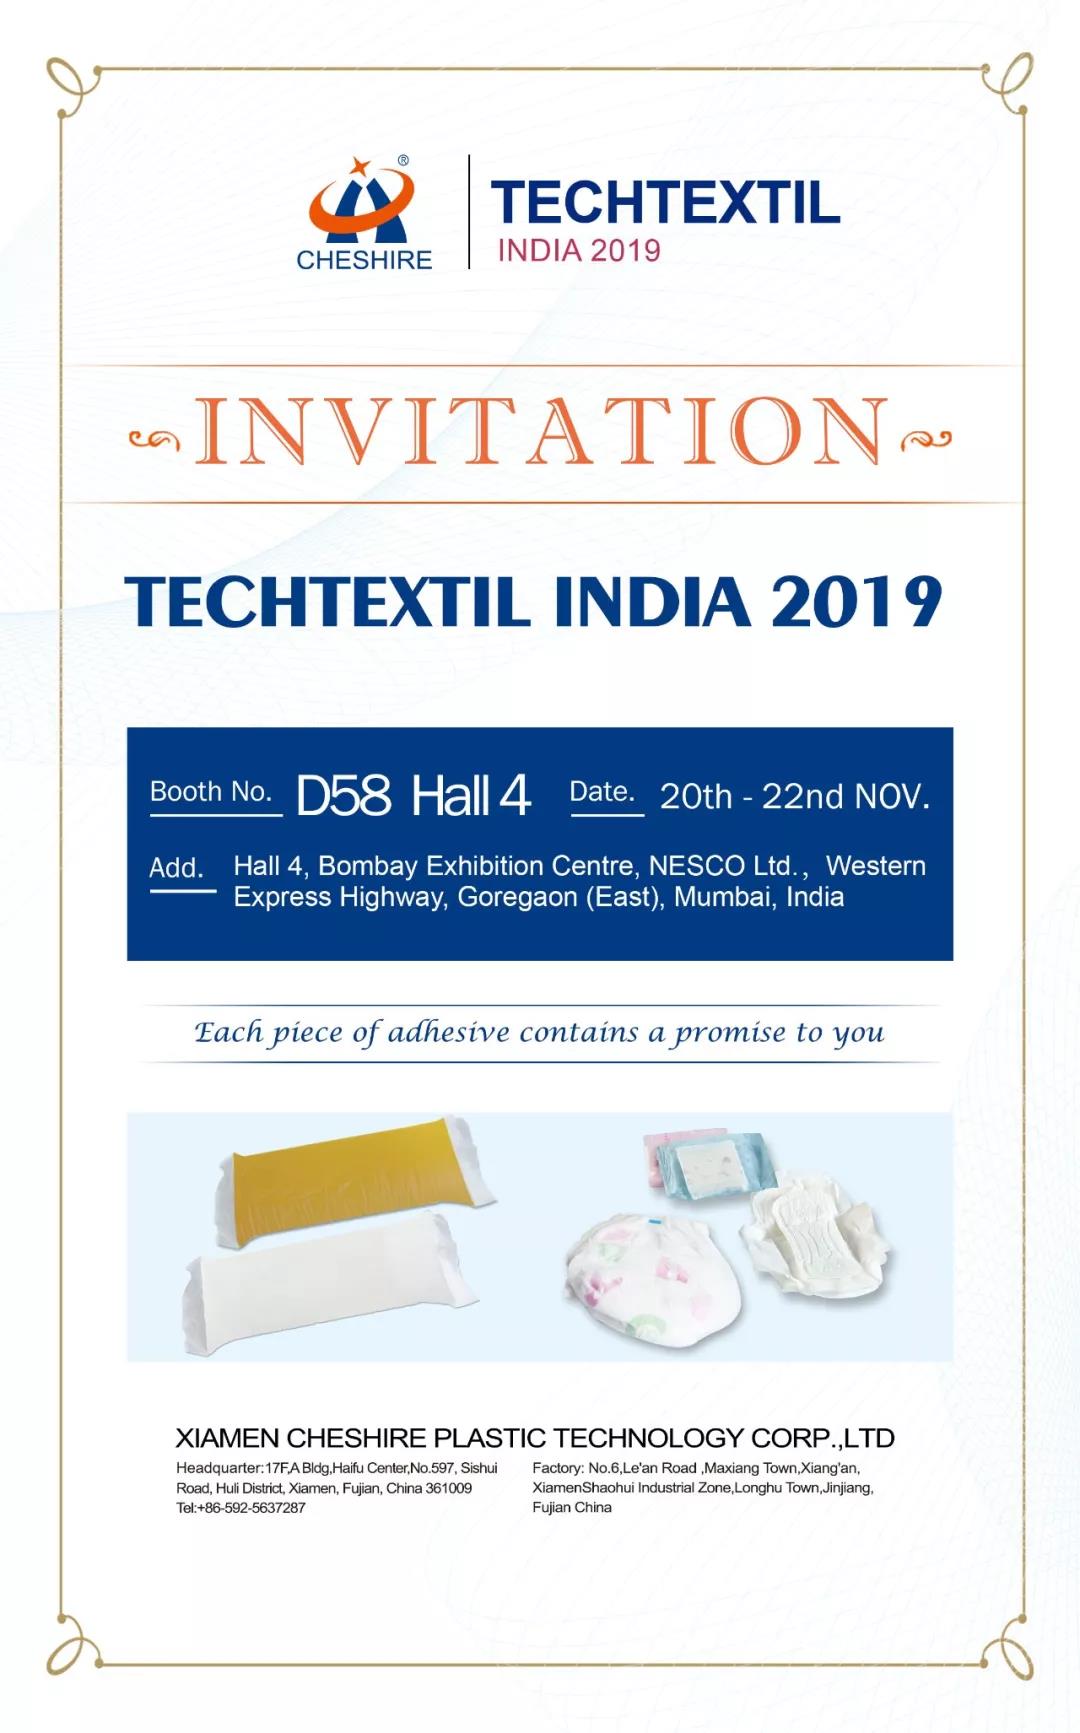 TECHTEXTIL INDIA 2019丨Welcome to Cheshire's booth D58 Hall4